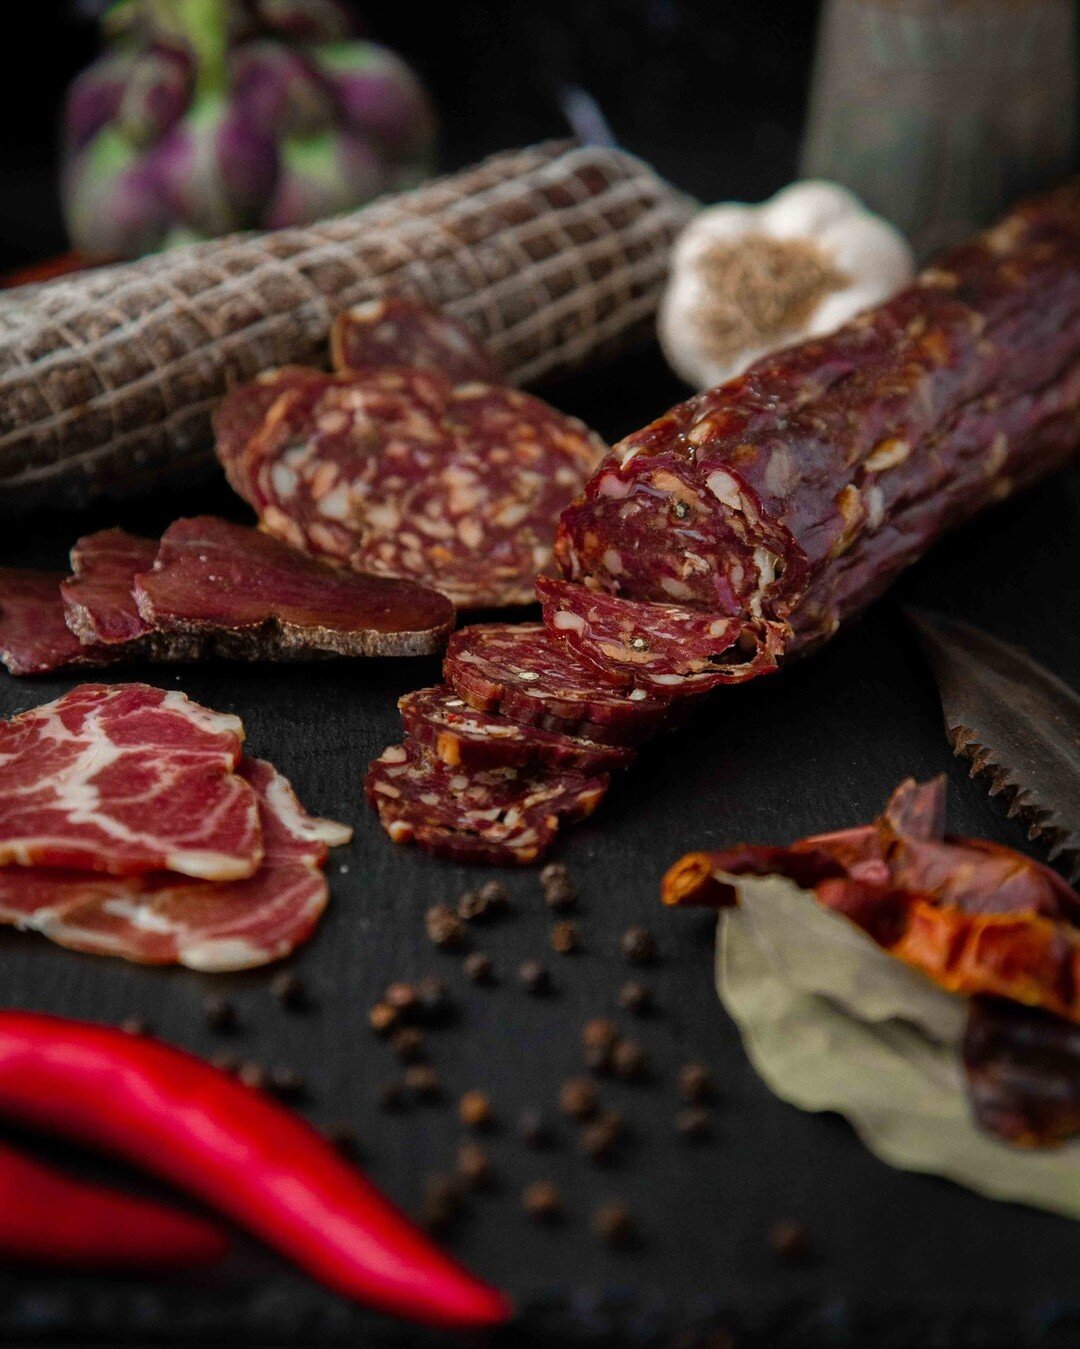 Zamora have been passionate about producing the best salami, sausages, and cured meats since 2010. 
Queenstown-based and available nationwide. 

Visit our website for your nearest stockist. https://www.zamora.co.nz/
#zamoranz #salami #gourmetsausages